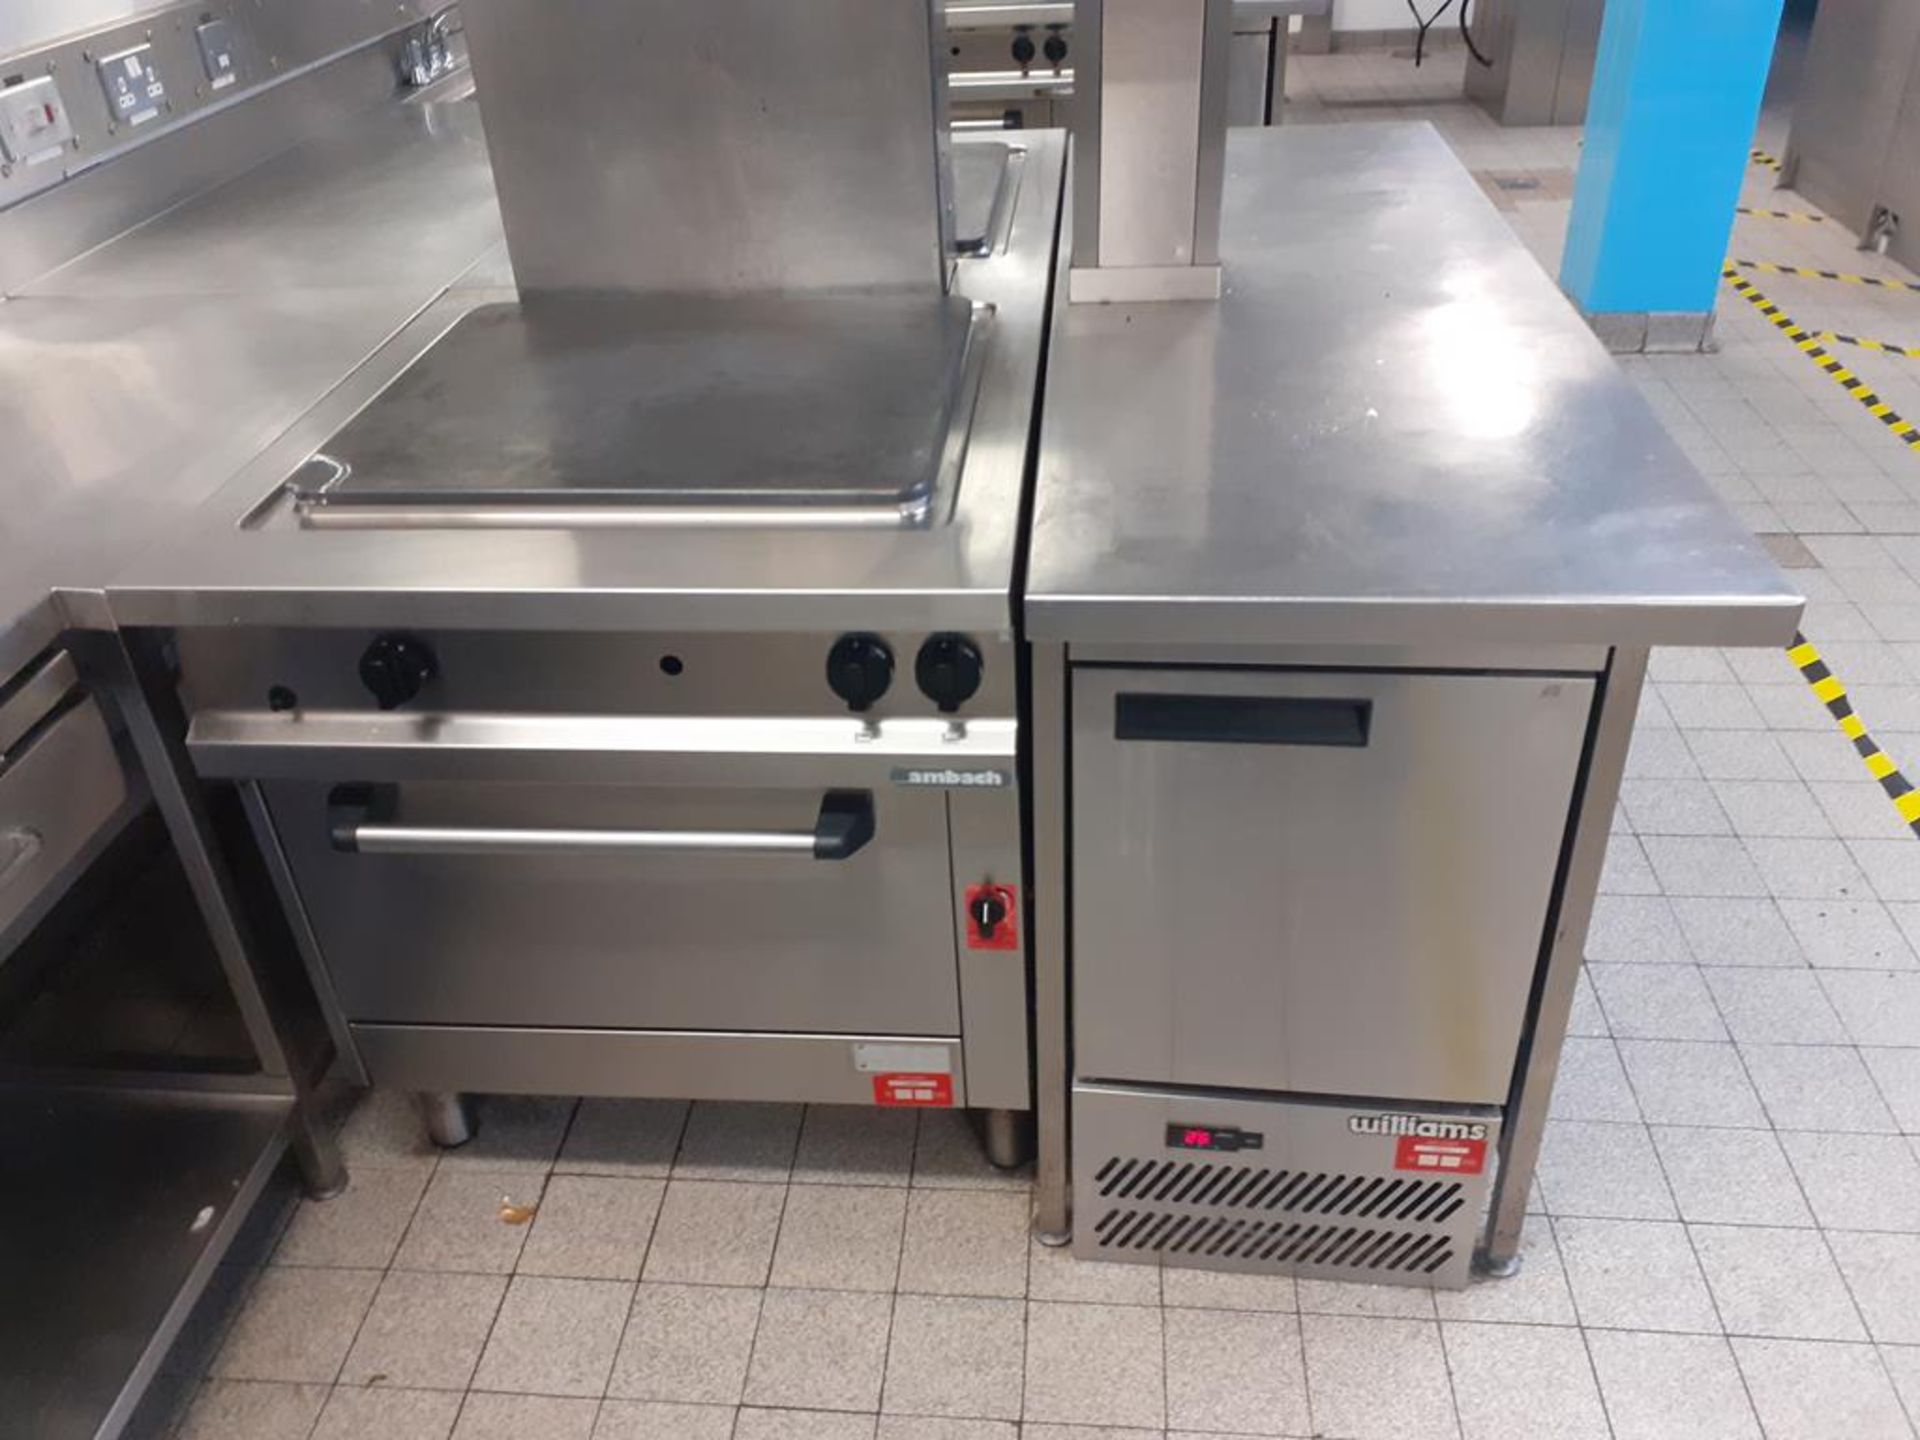 Commercial S/S Cooking Unit to include Salamander Grill, 2x Ambach Electric Range Solid Top Cookers - Image 3 of 4